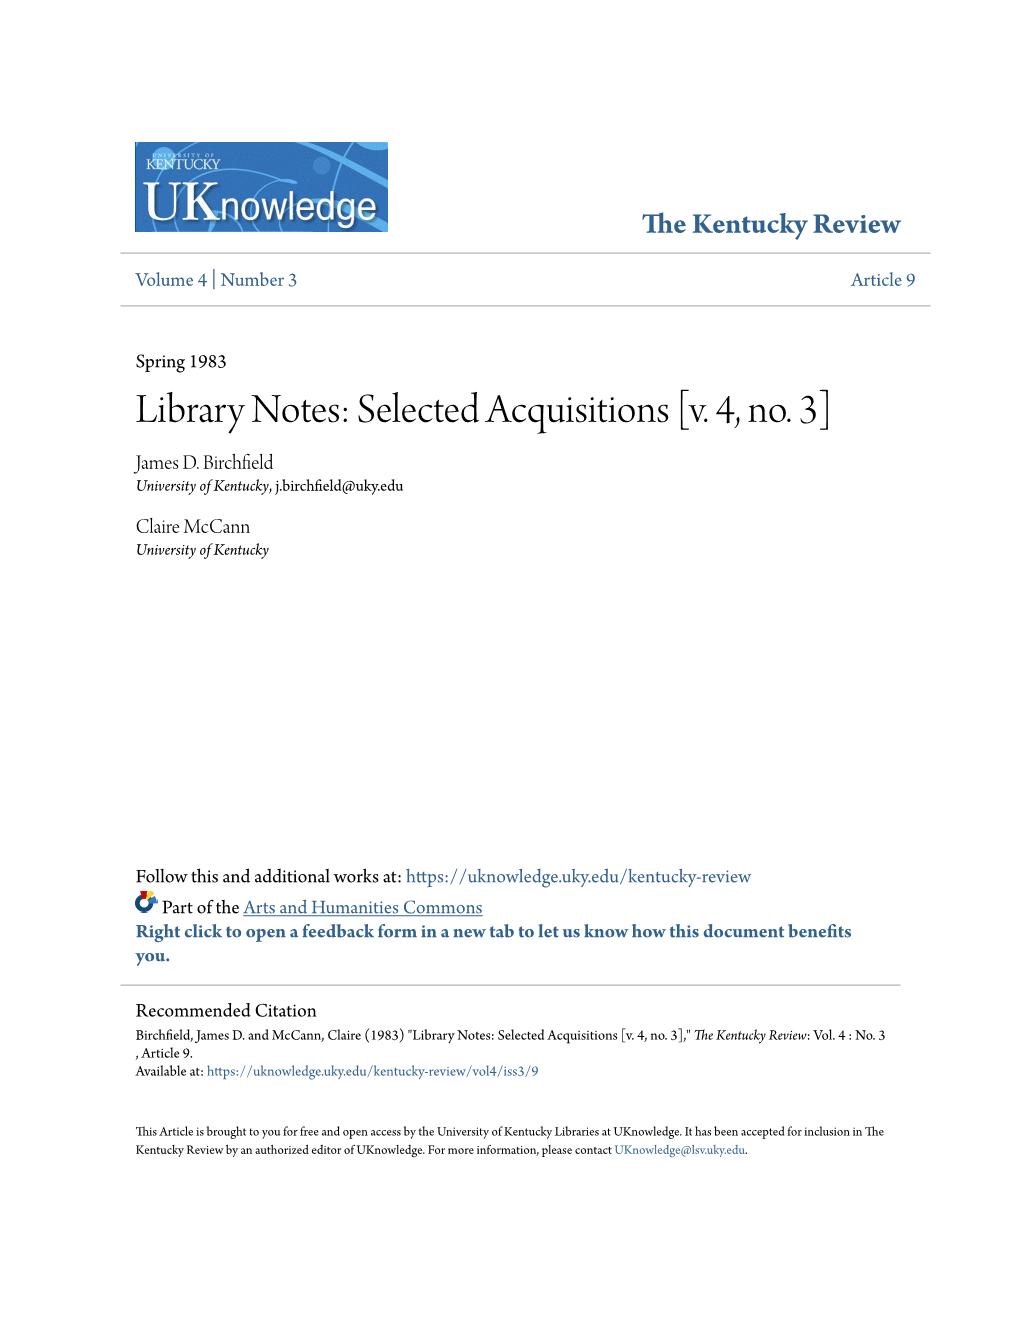 Library Notes: Selected Acquisitions [V